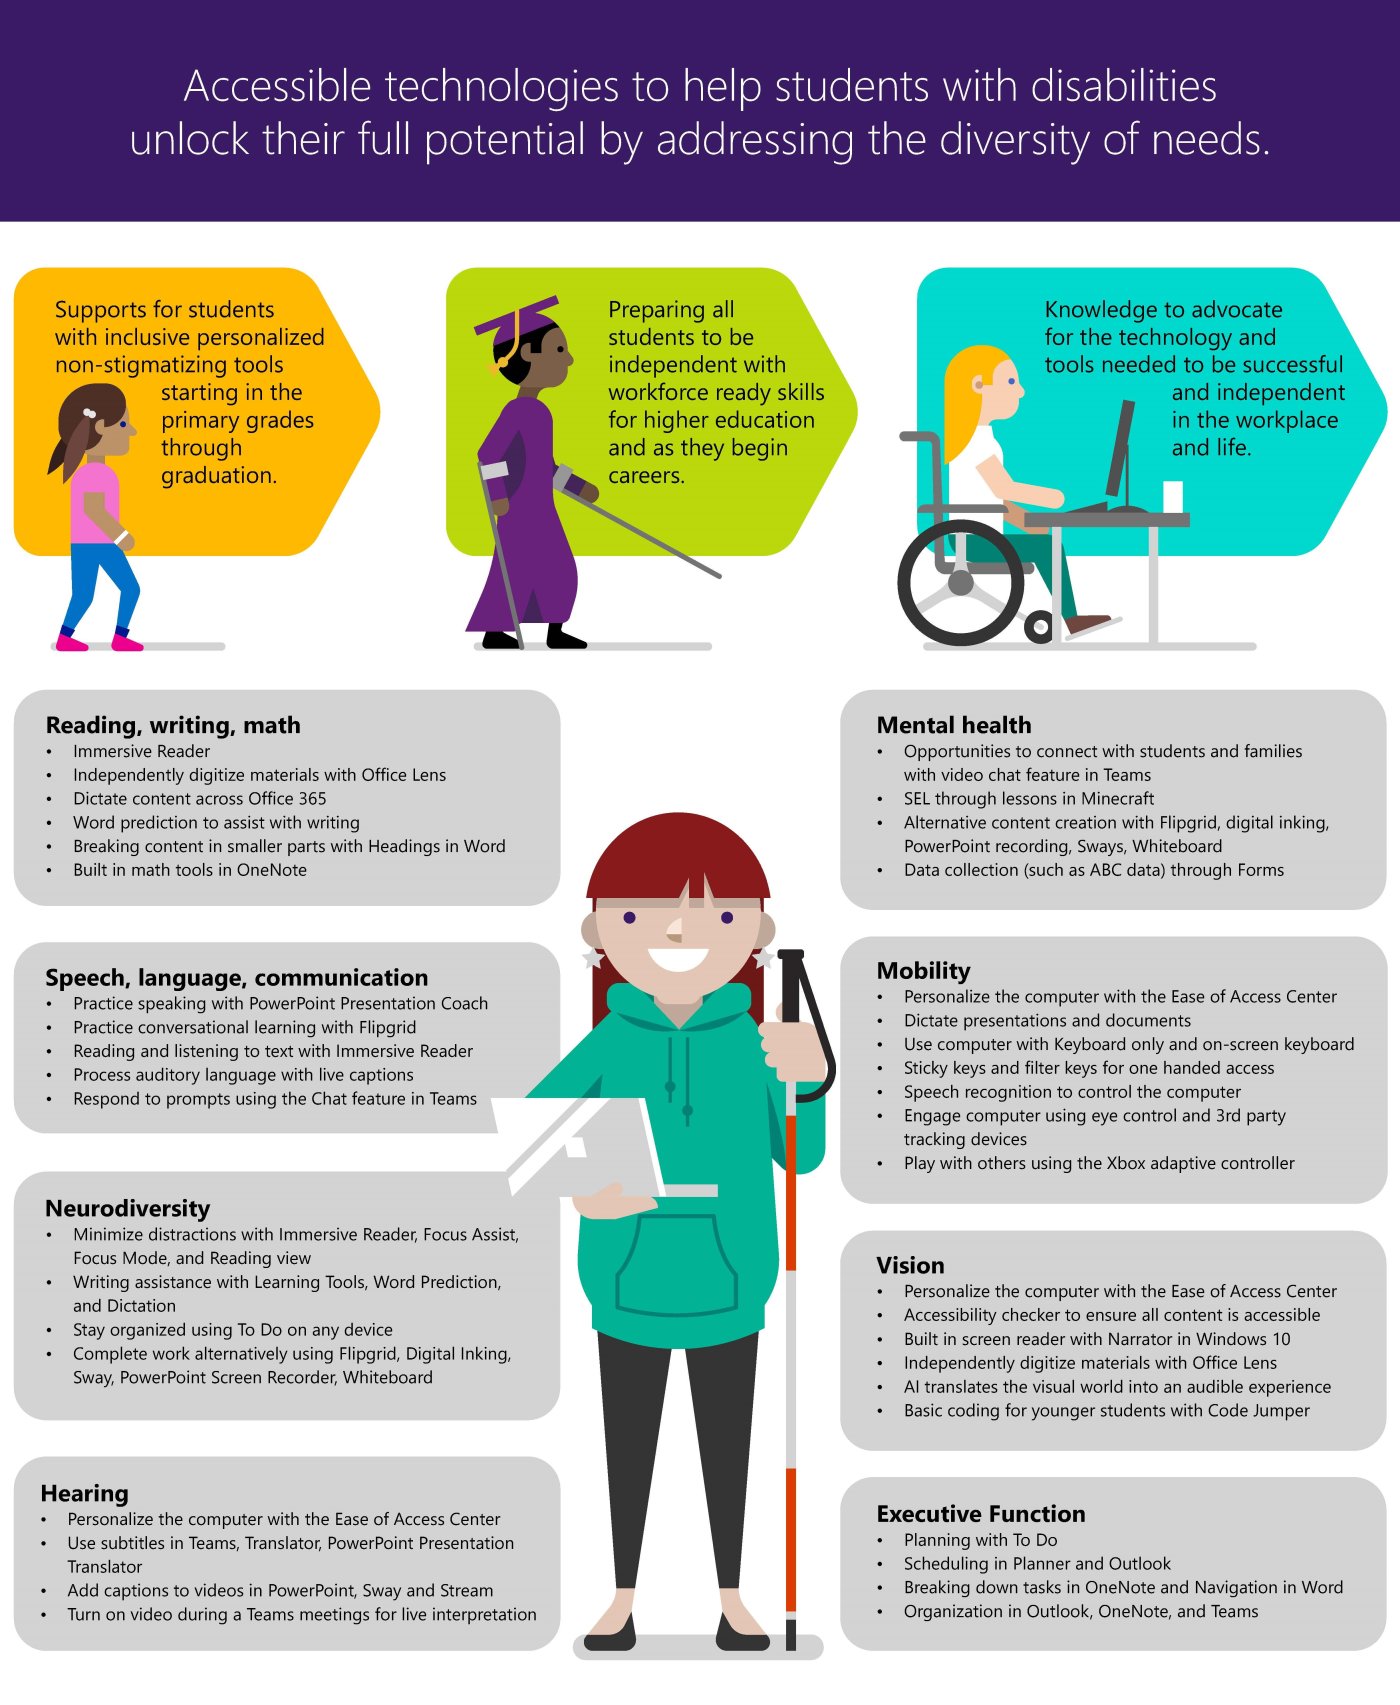 Mike Tholfsen Excellent New Infographic On Accessibility And Inclusion For Students Using Technology A Critical Topic For Distancelearning Deep Dive Into The New Microsoftedu Site Dedicated To This